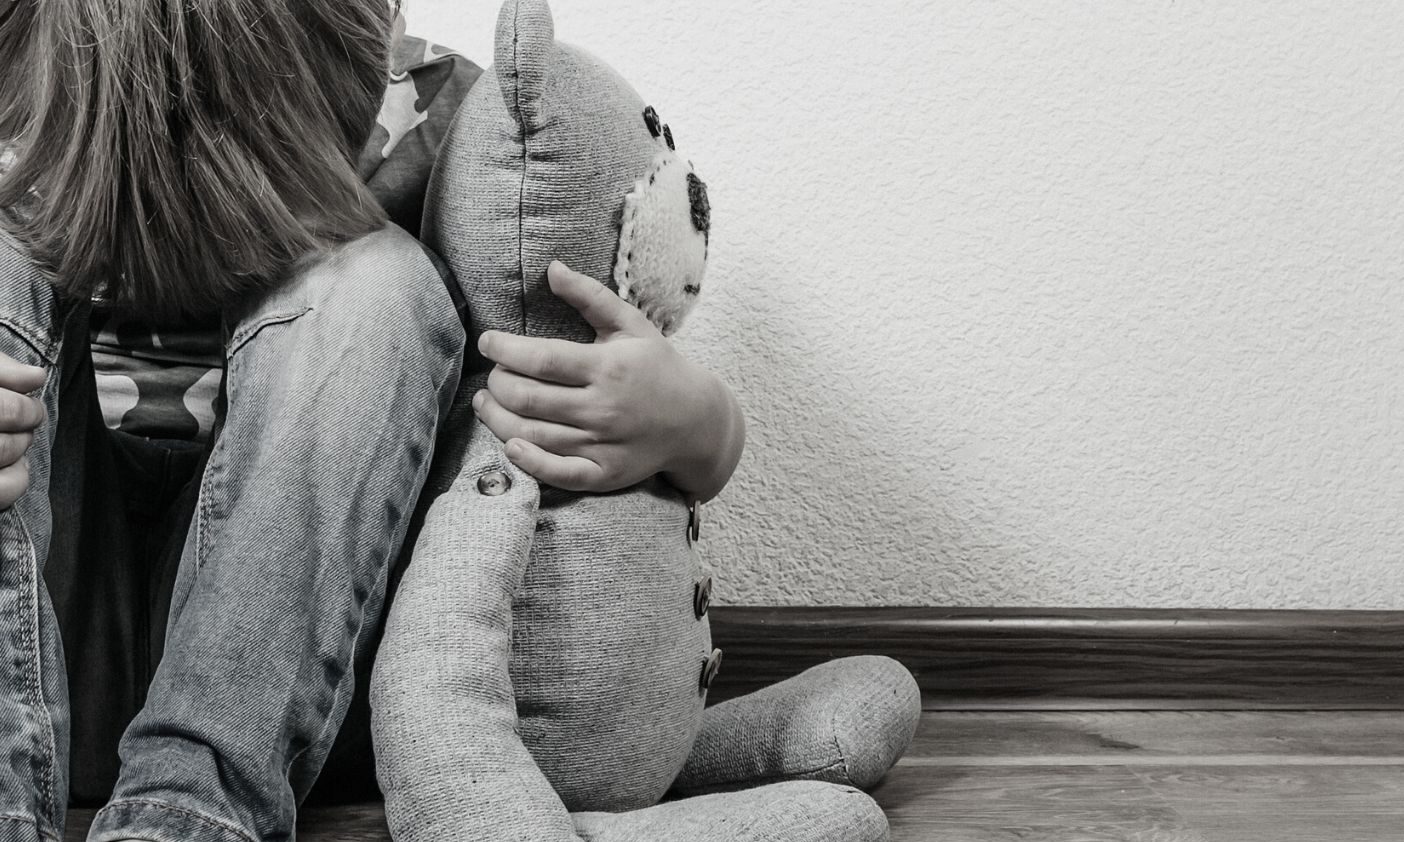 Significant disparities in foster care funding in Wales, new data shows